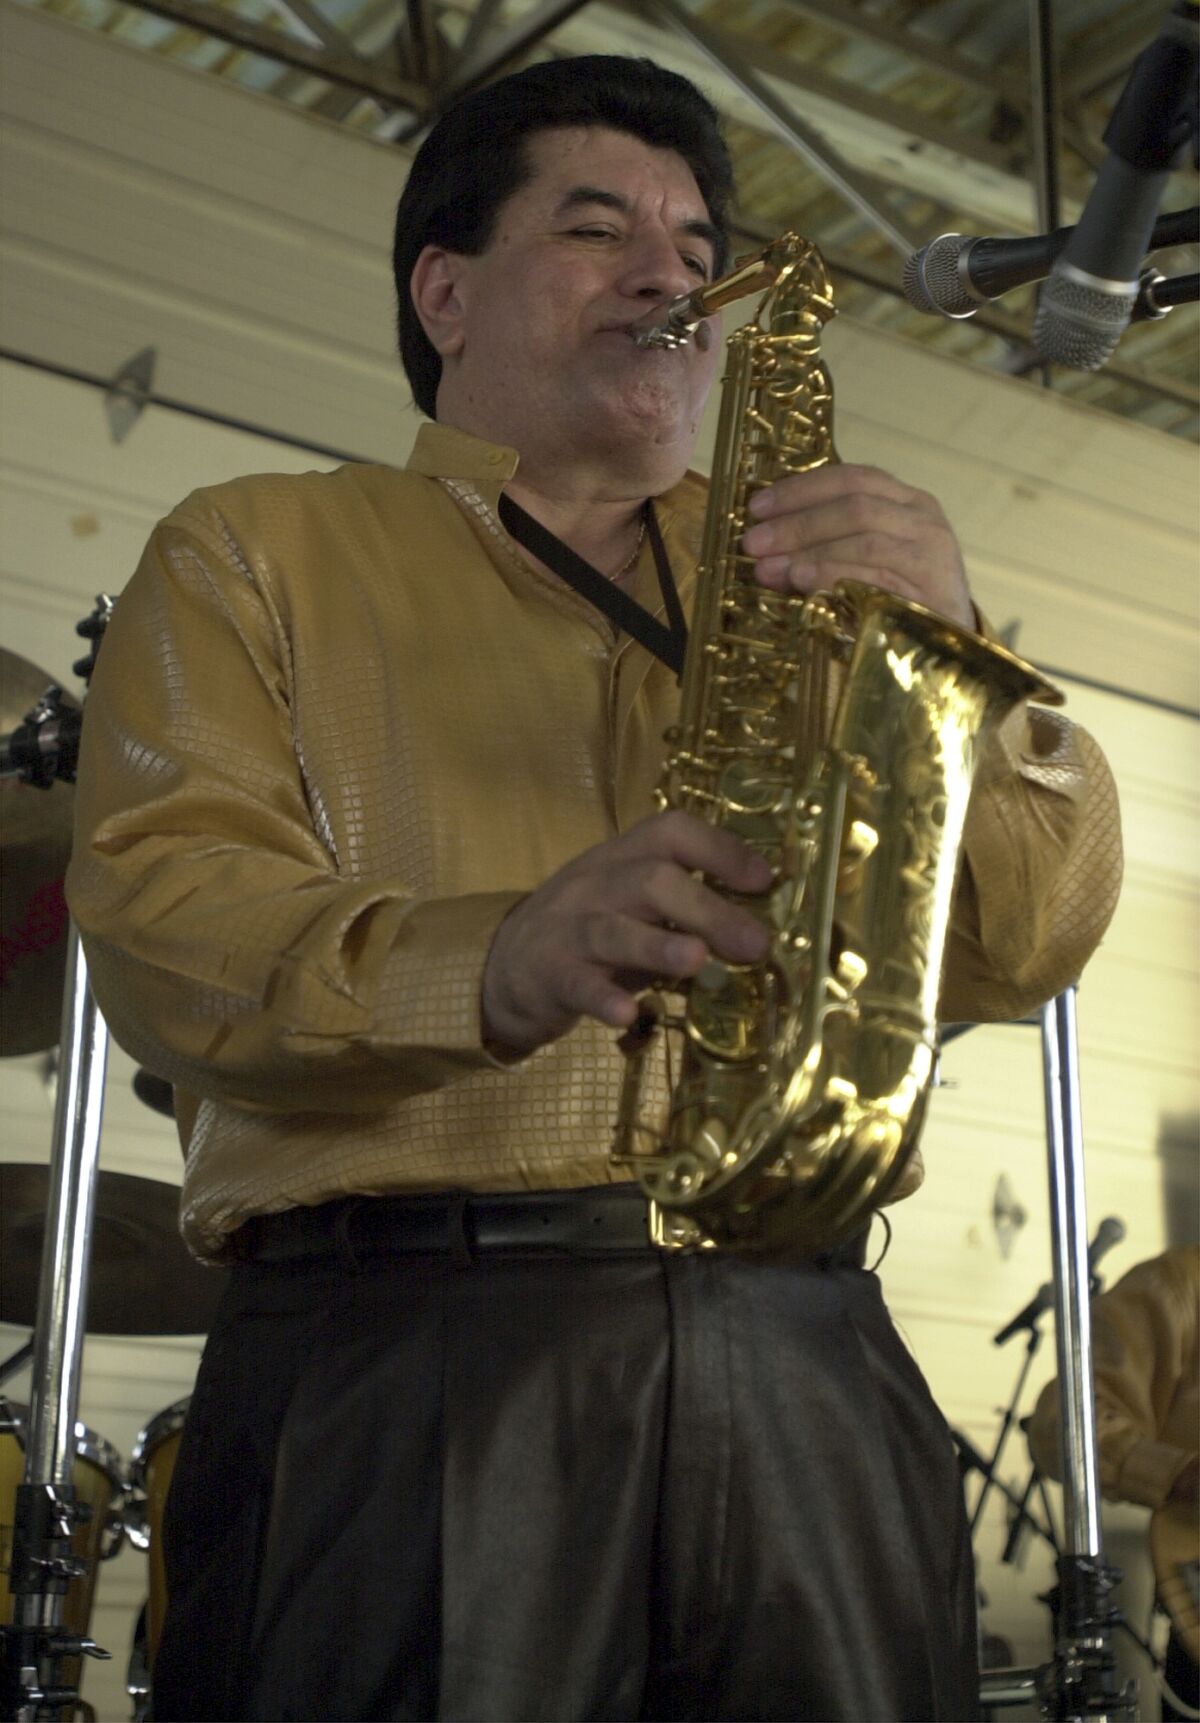 Fito Olivares performs during the Cinco de Mayo celebration held at Rosedale Park Sunday May 5, 2002 in San Antonio, Texas. Olivares, known for songs that were wedding and quinceanera mainstays including the hit “Juana La Cubana,” died Friday, March 17, 2023. He was 75. The noted saxophonist died in the morning at home in Houston, according to his wife, Griselda Olivares. (Edward A. Ornelas/The San Antonio Express-News via AP)